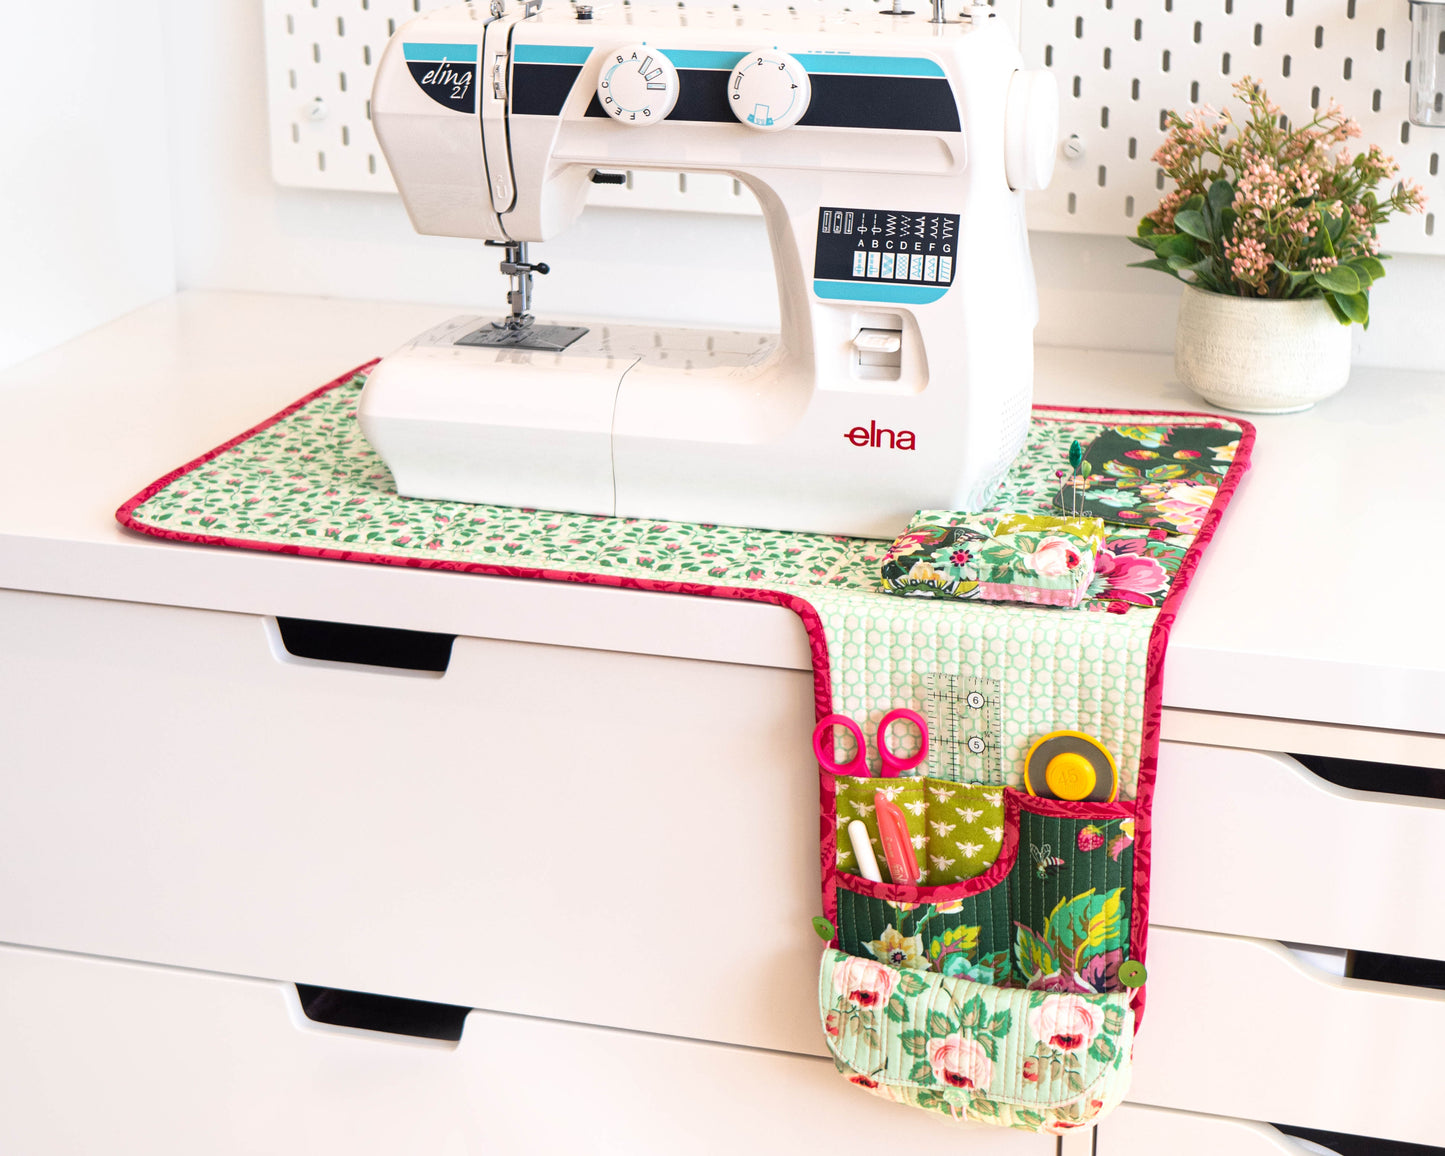 The Sewing Space Station